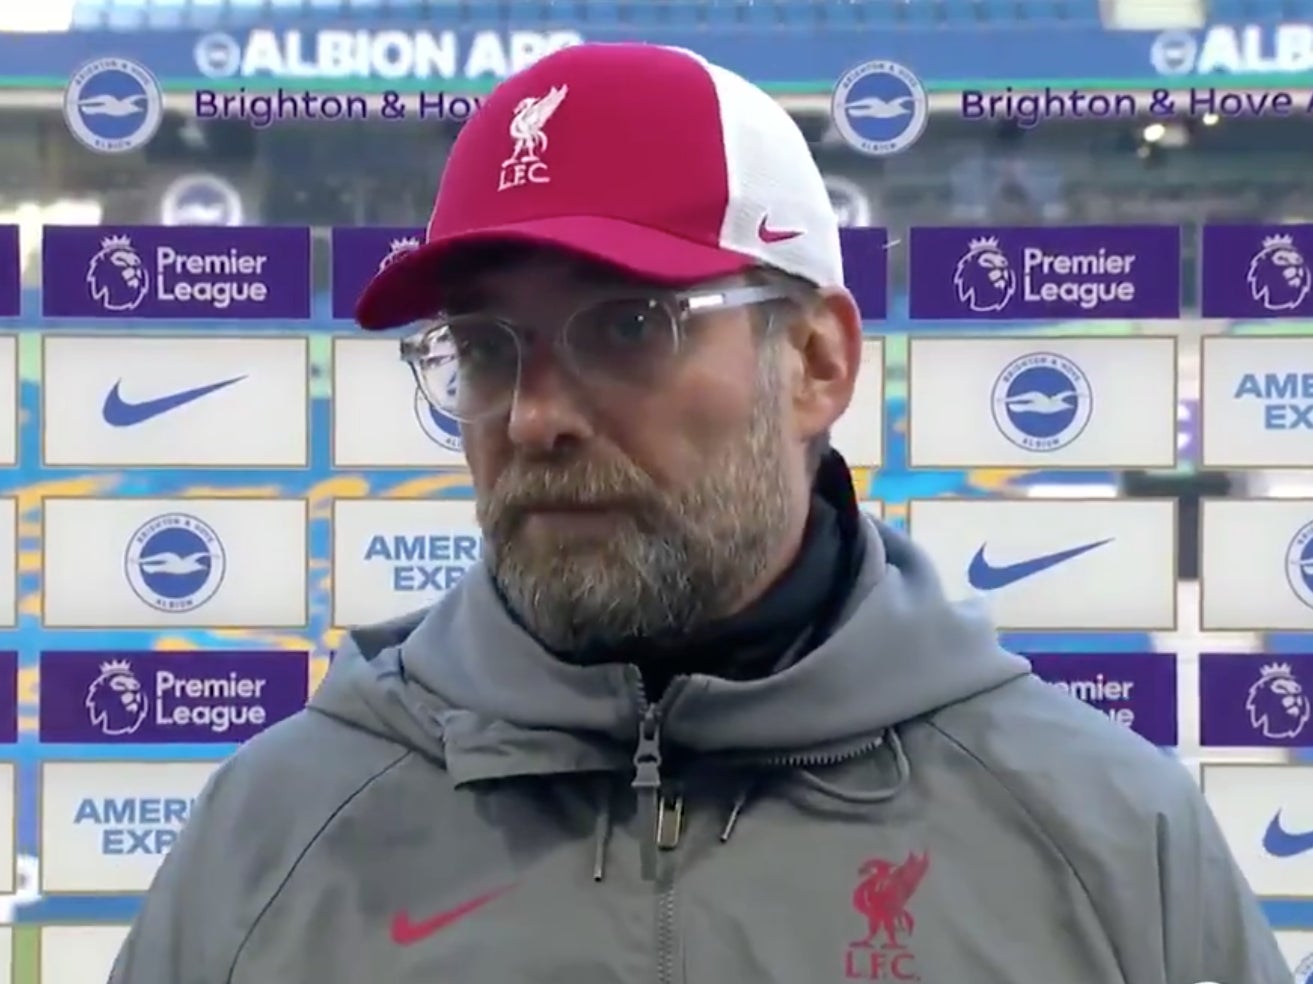 Klopp is unhappy with the scheduling